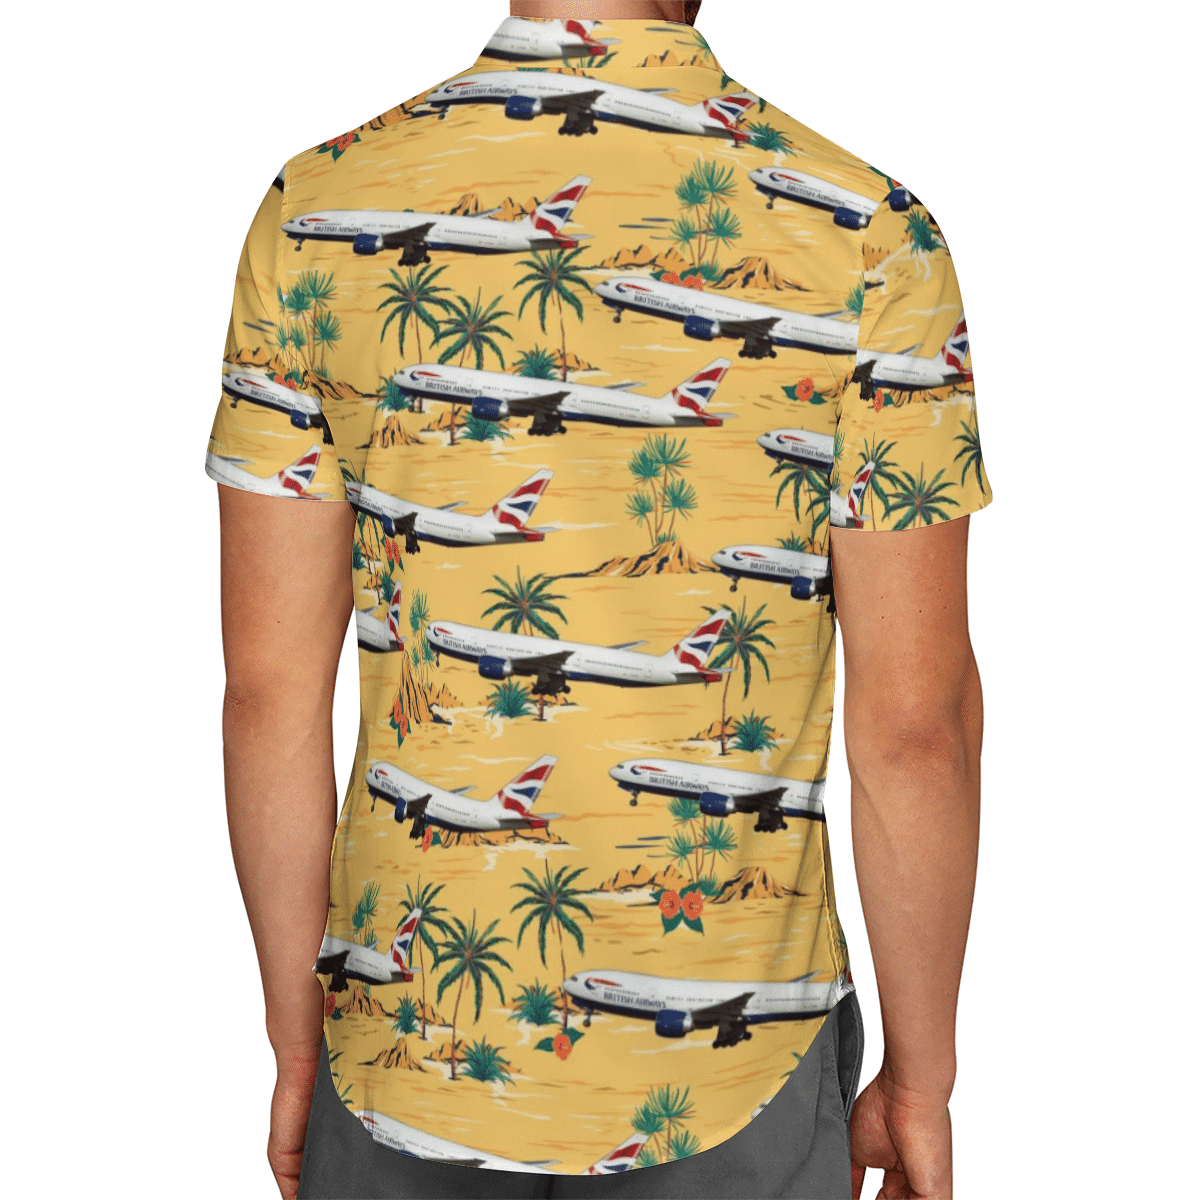 Going to the beach with a quality shirt 91